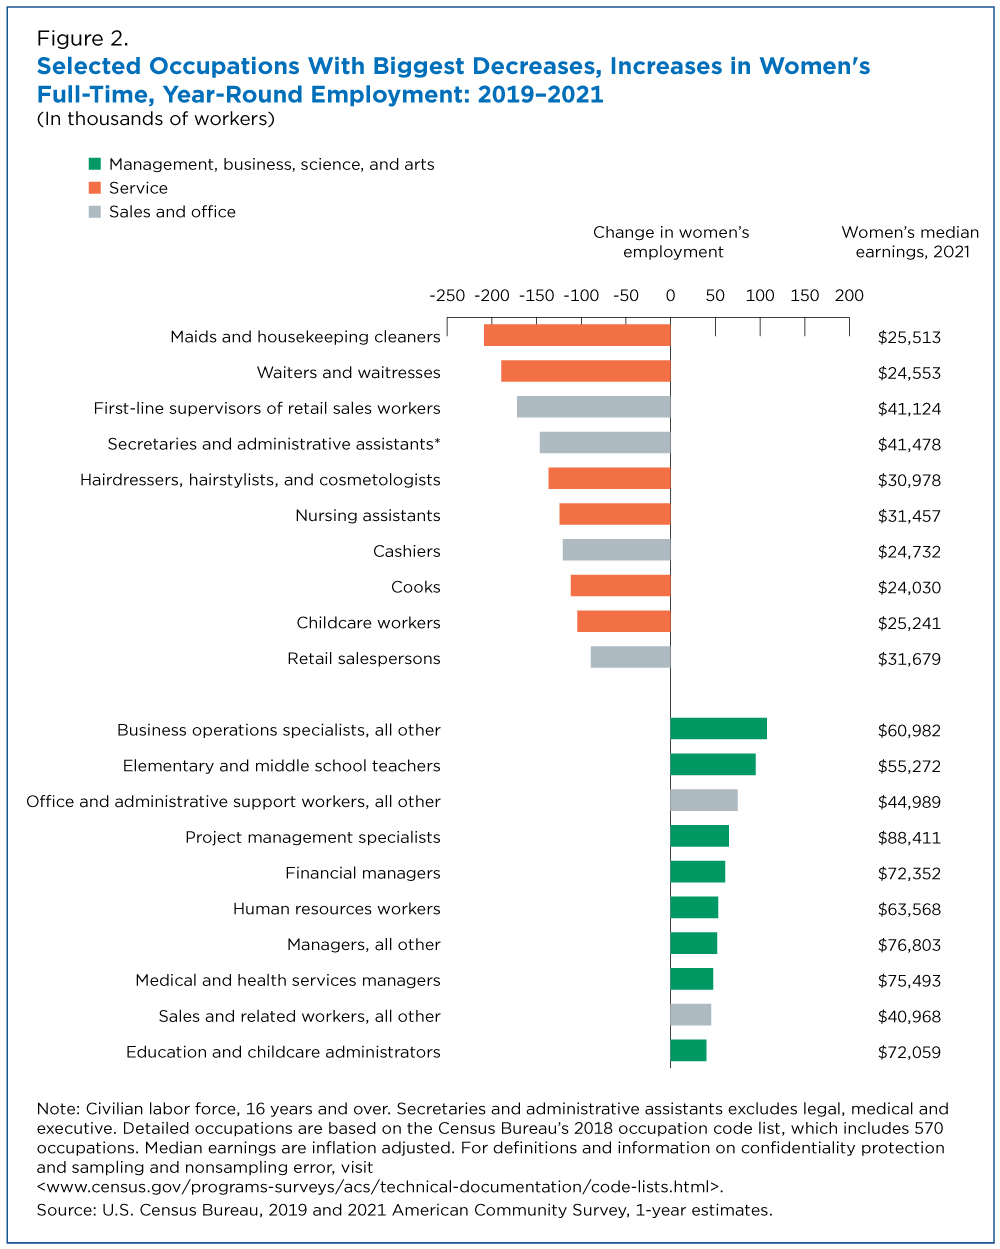 Figure 2. Selected Occupations With Biggest Decreases, Increases in Women's Full-Time, Year-Round Employment: 2019-2021